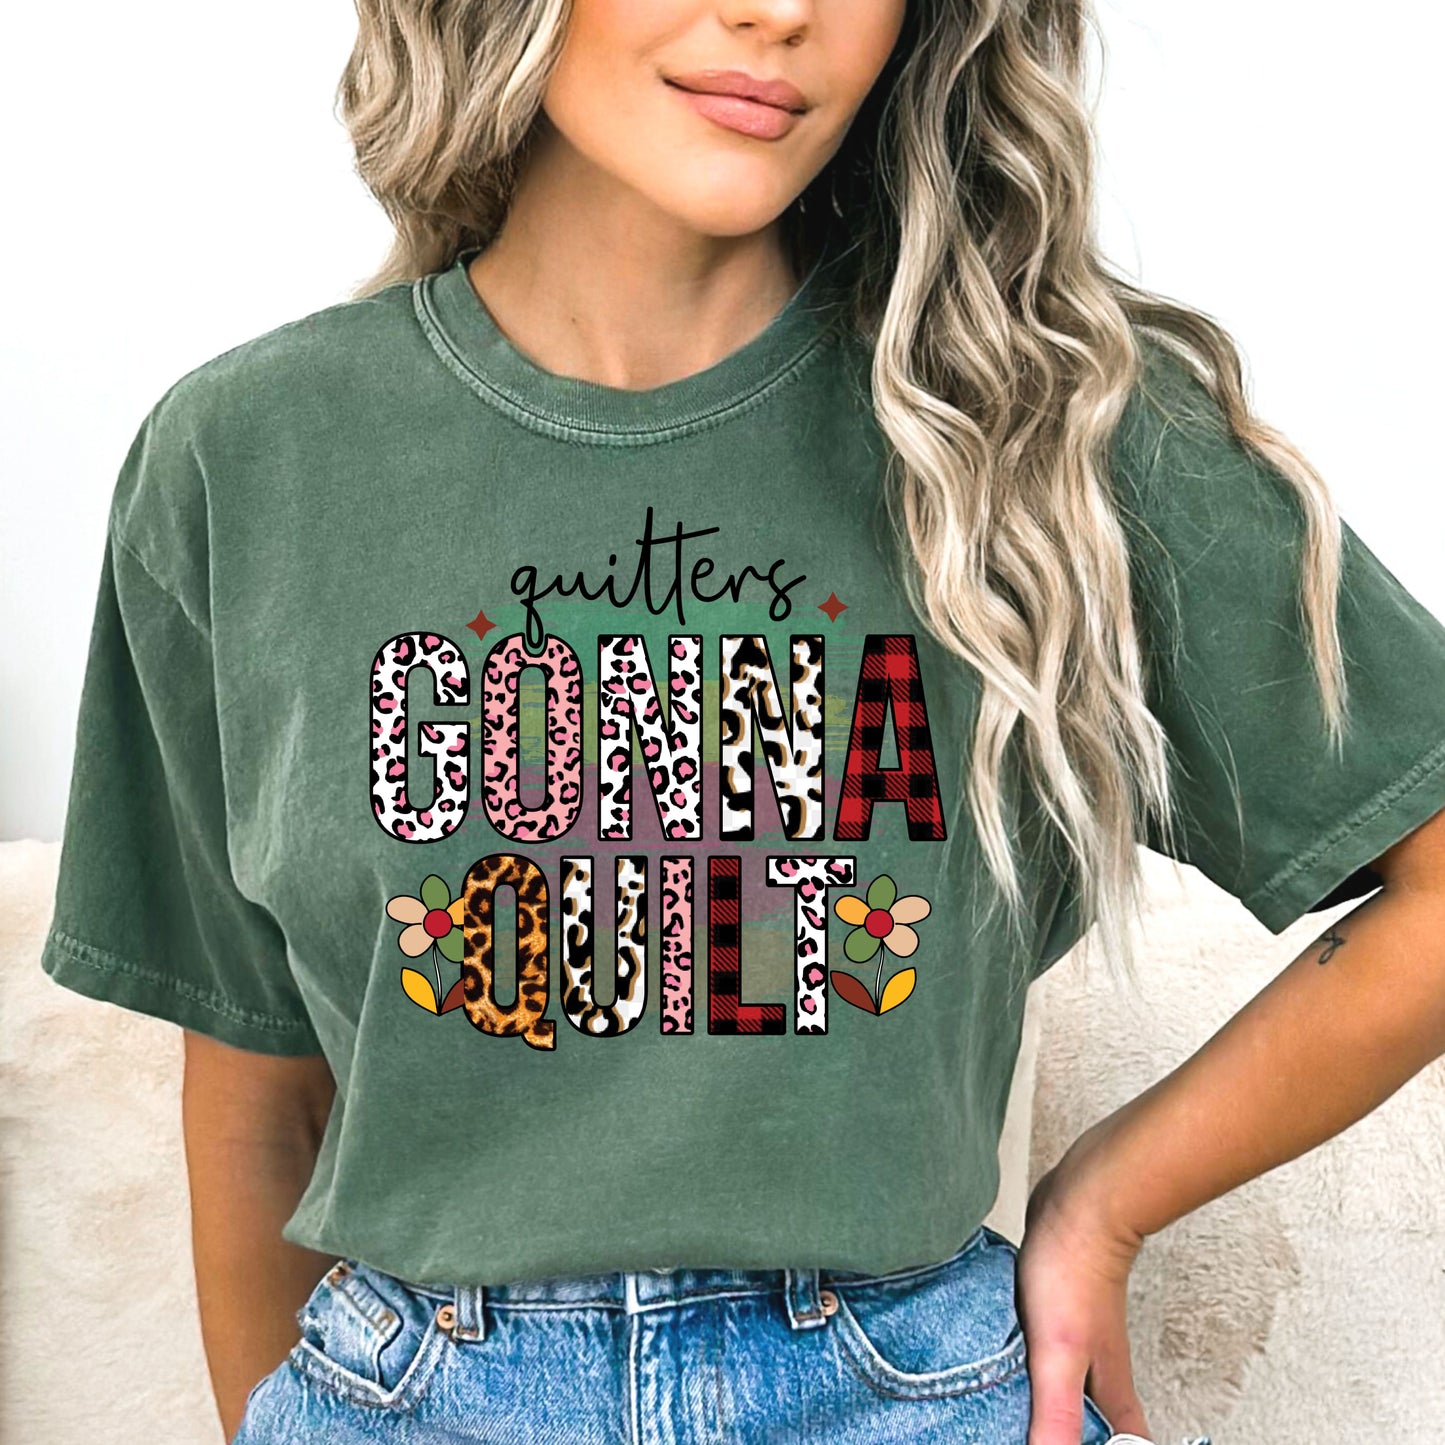 Quilters Gonna Quilt T-shirt, Quilt Lover T-Shirt, Crafter T-Shirt, Shirts for Her, Gifts For Her, Gifts For Friend, Gifts for Mom